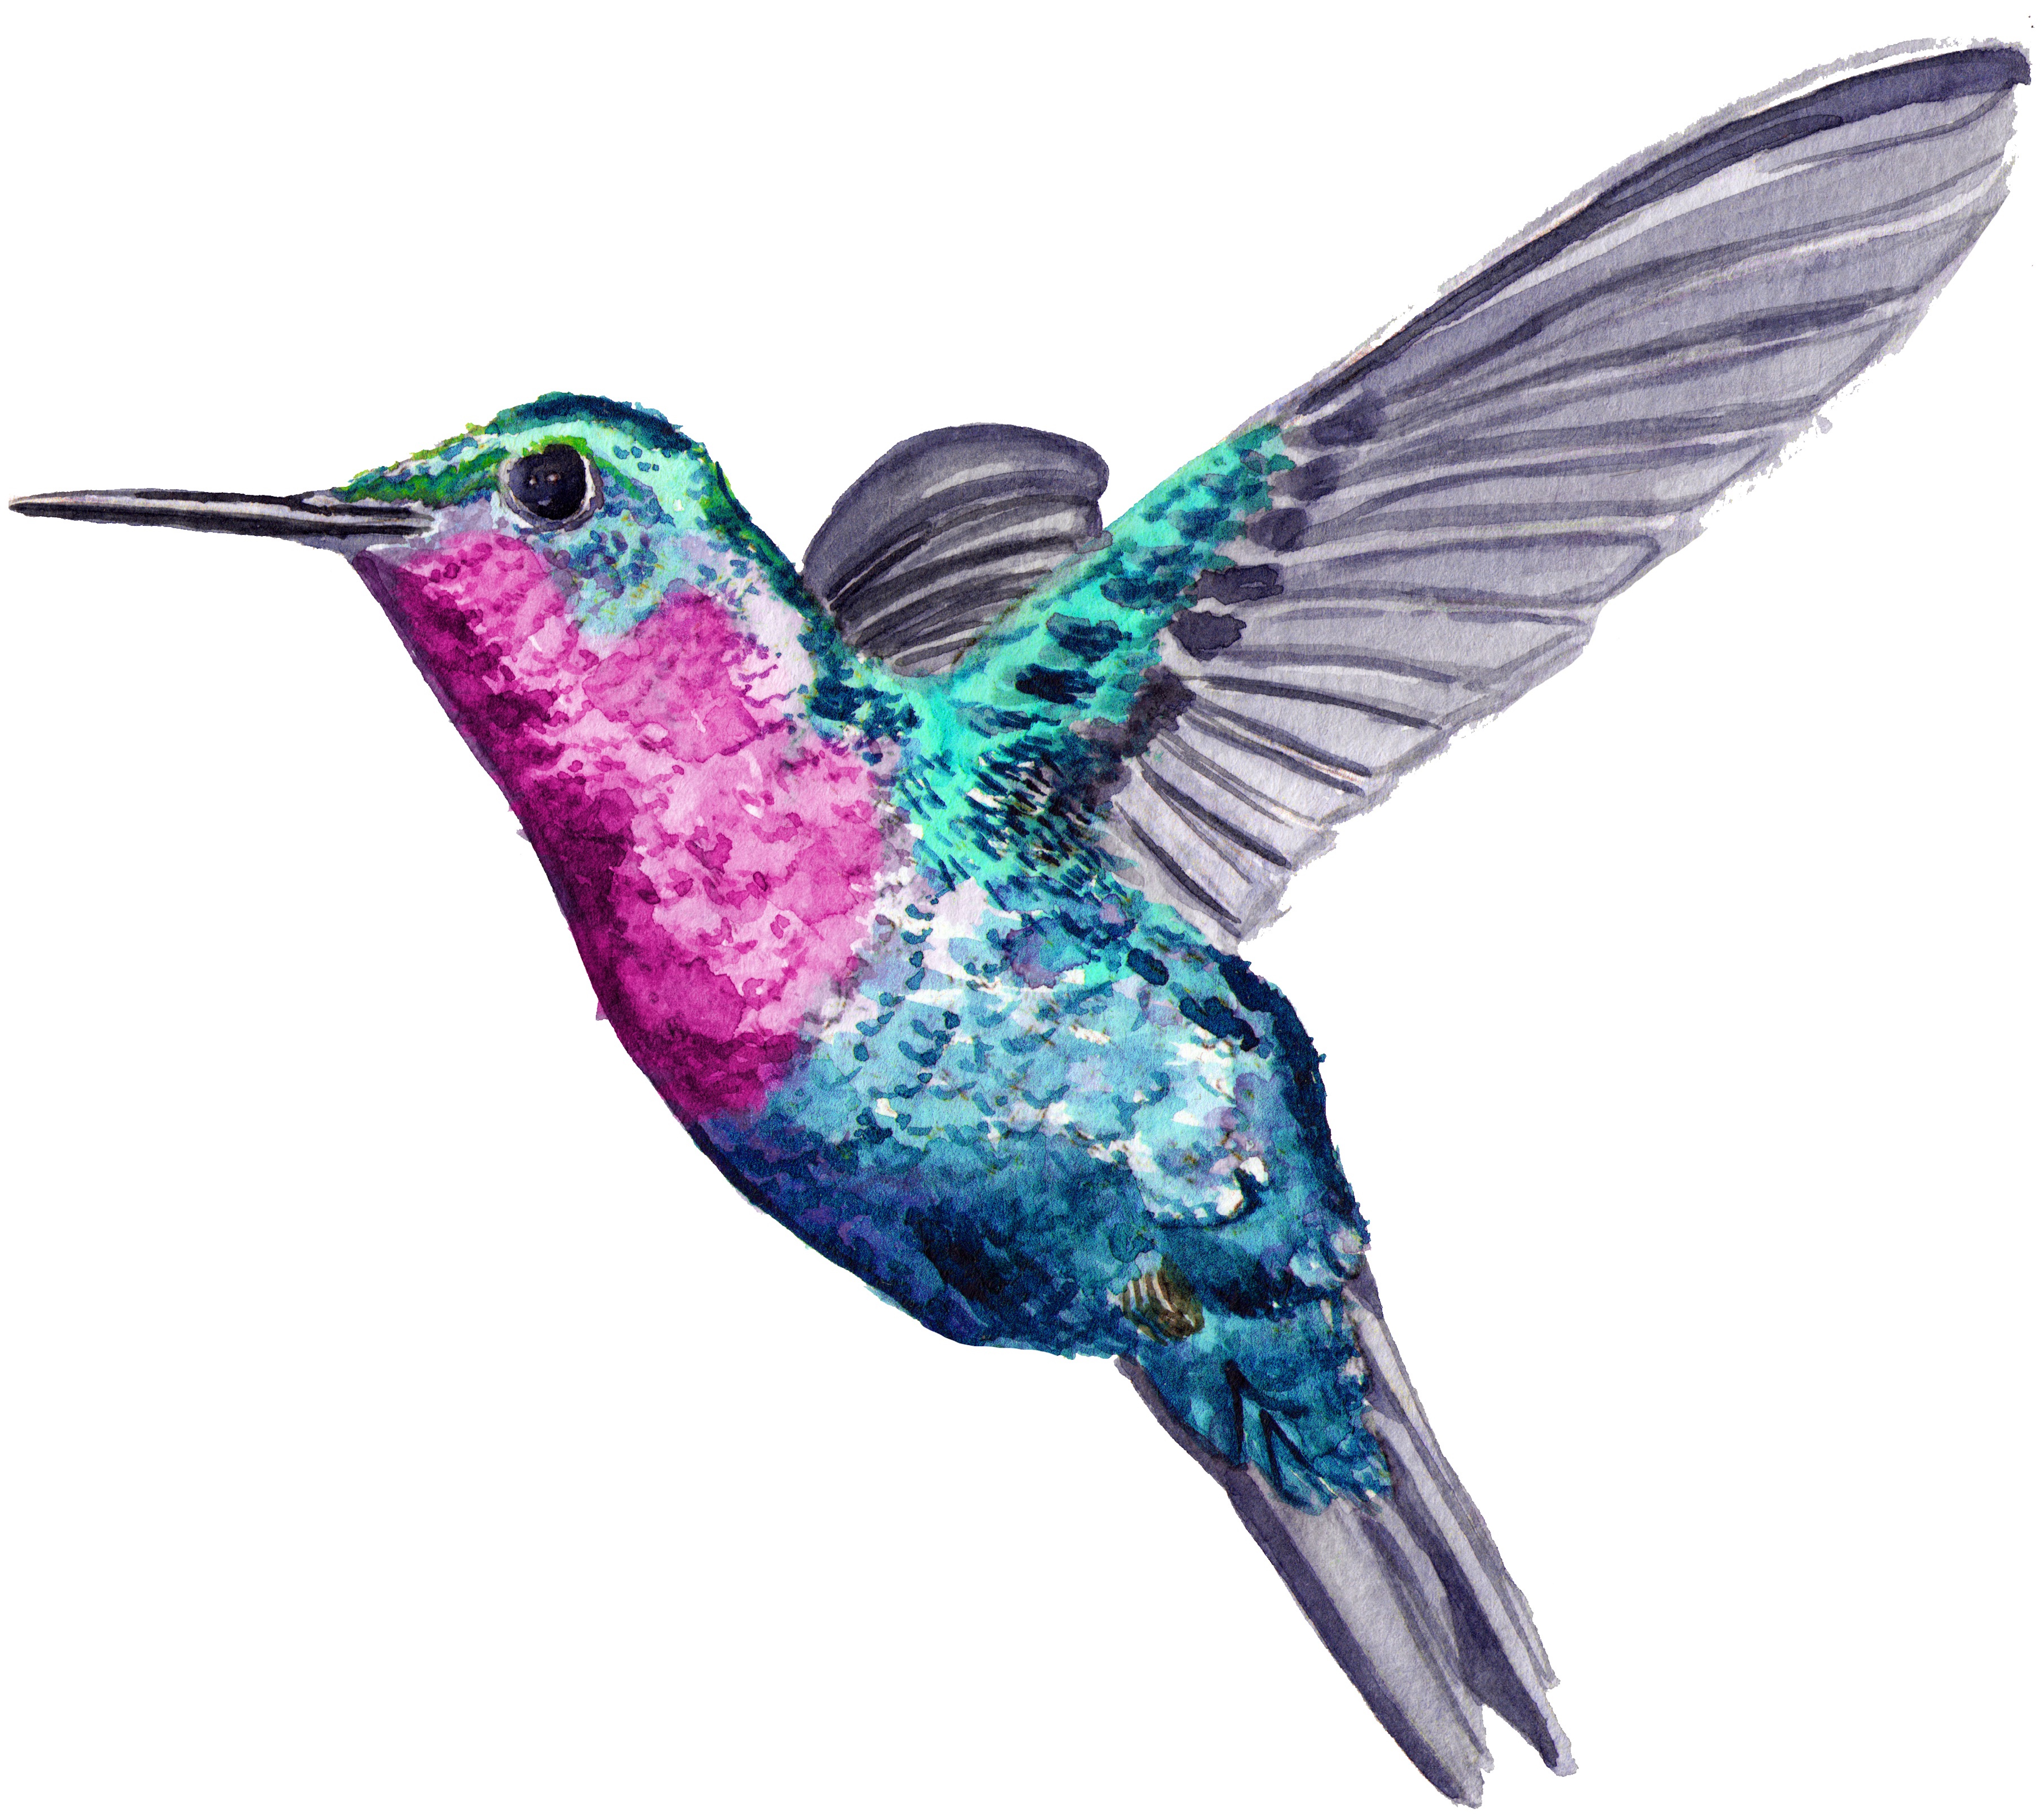 watercolor painting of a hummingbird